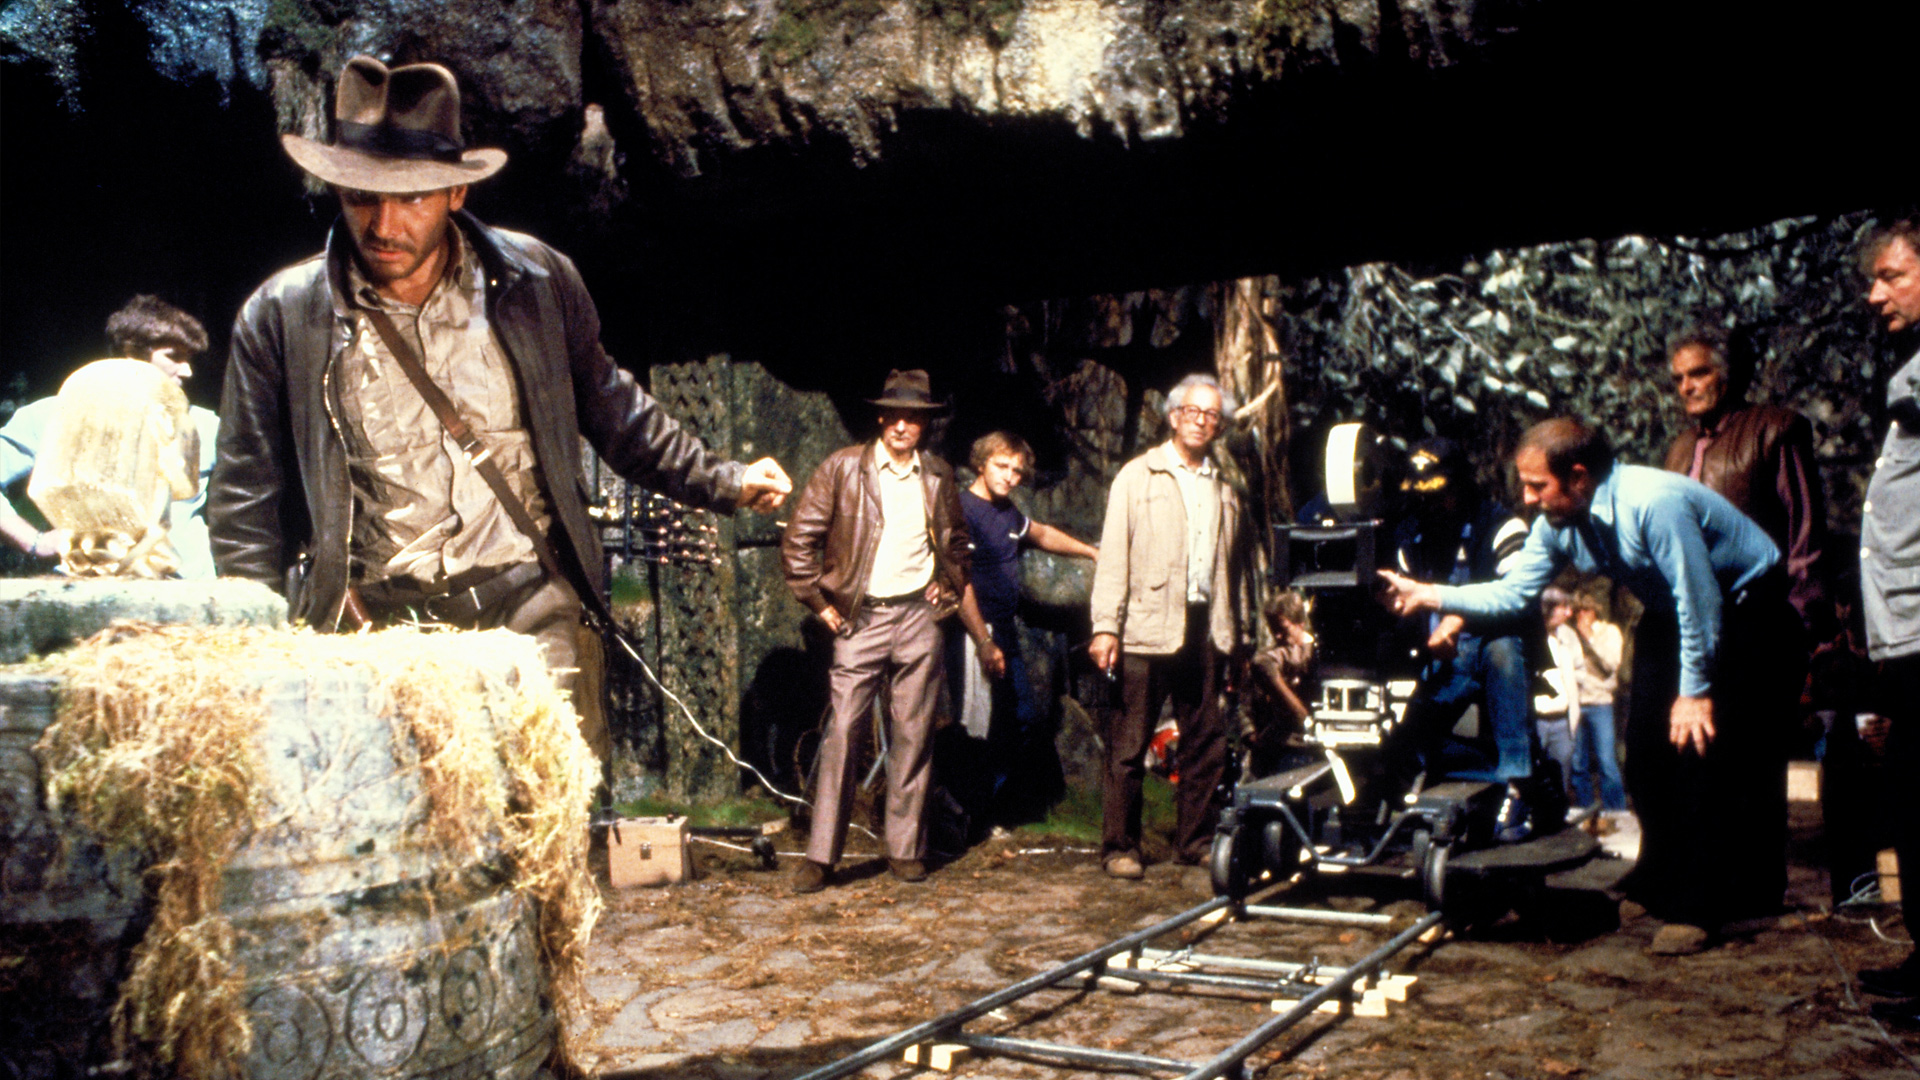 Filming of the opening scene of Indiana Jones and the Raiders of the Lost Ark